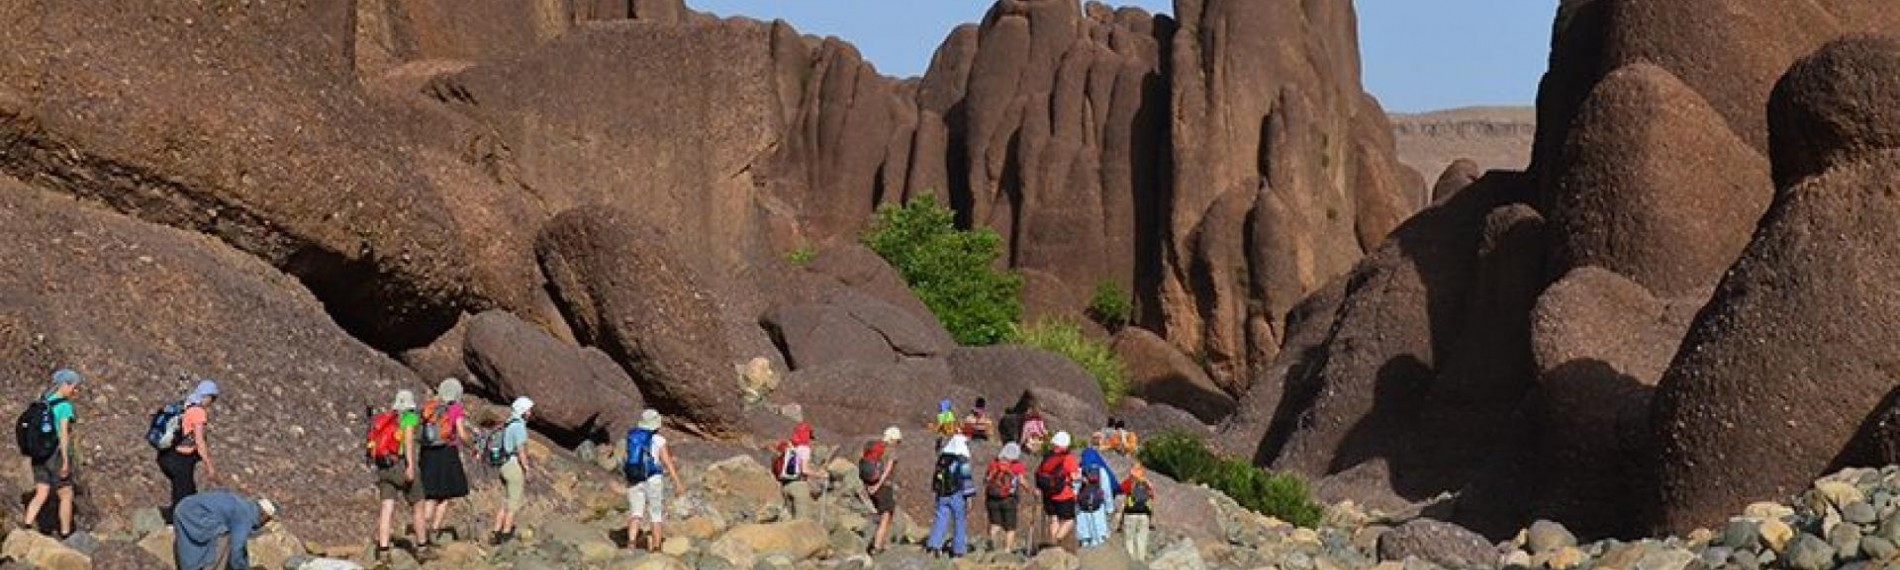 Morocco adventure tours small groups